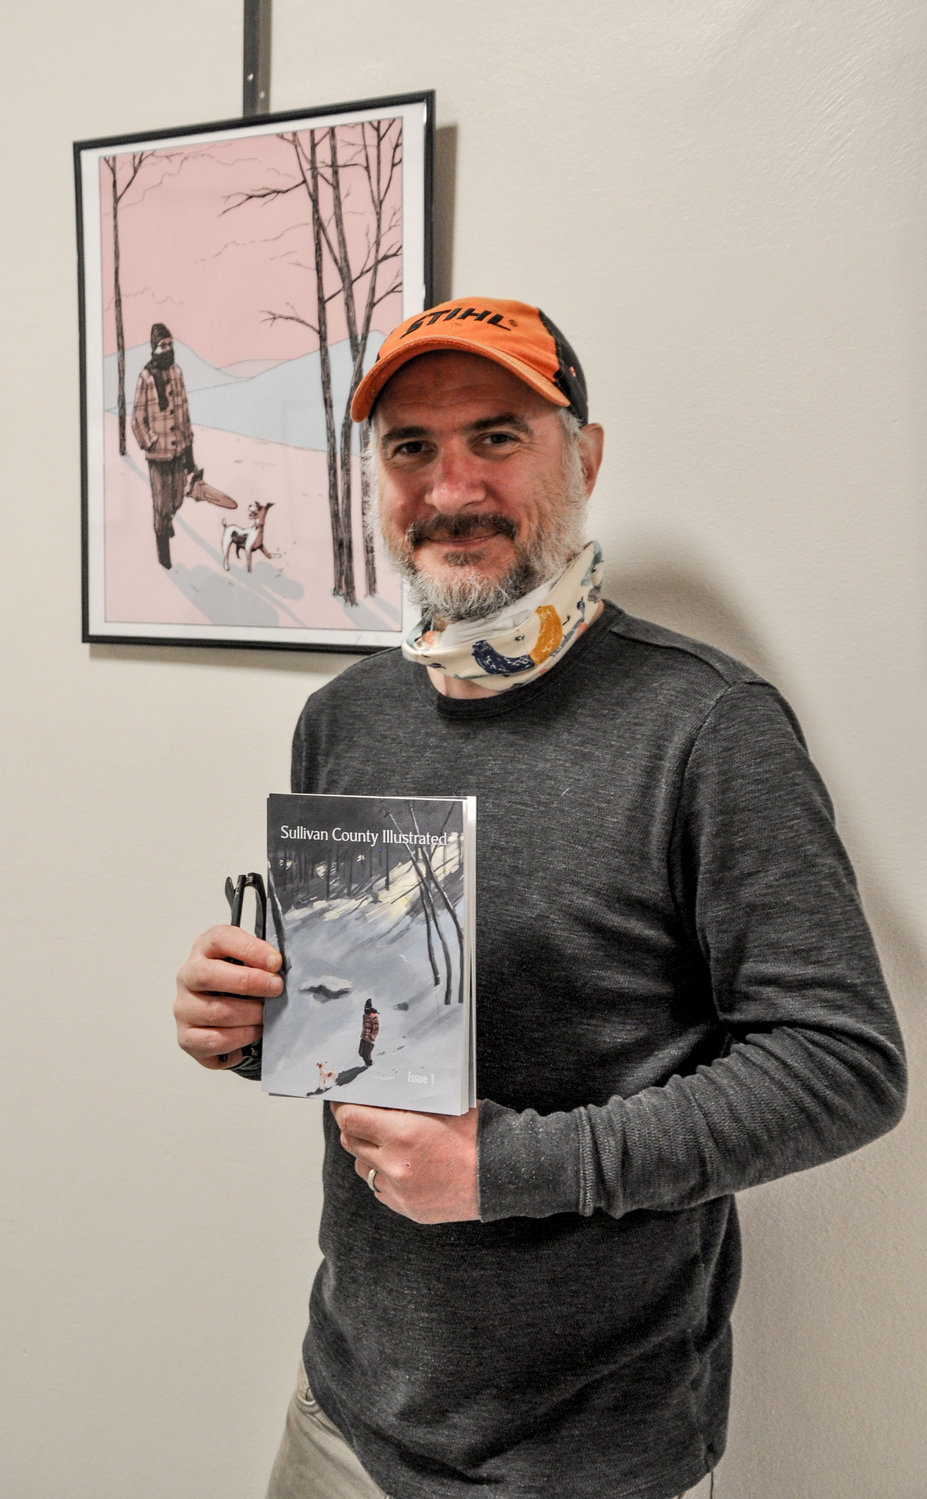 I was fortunate enough to meet up with artist L.J.Ruell and we chatted about his new zine, “Sullivan County Illustrated.”